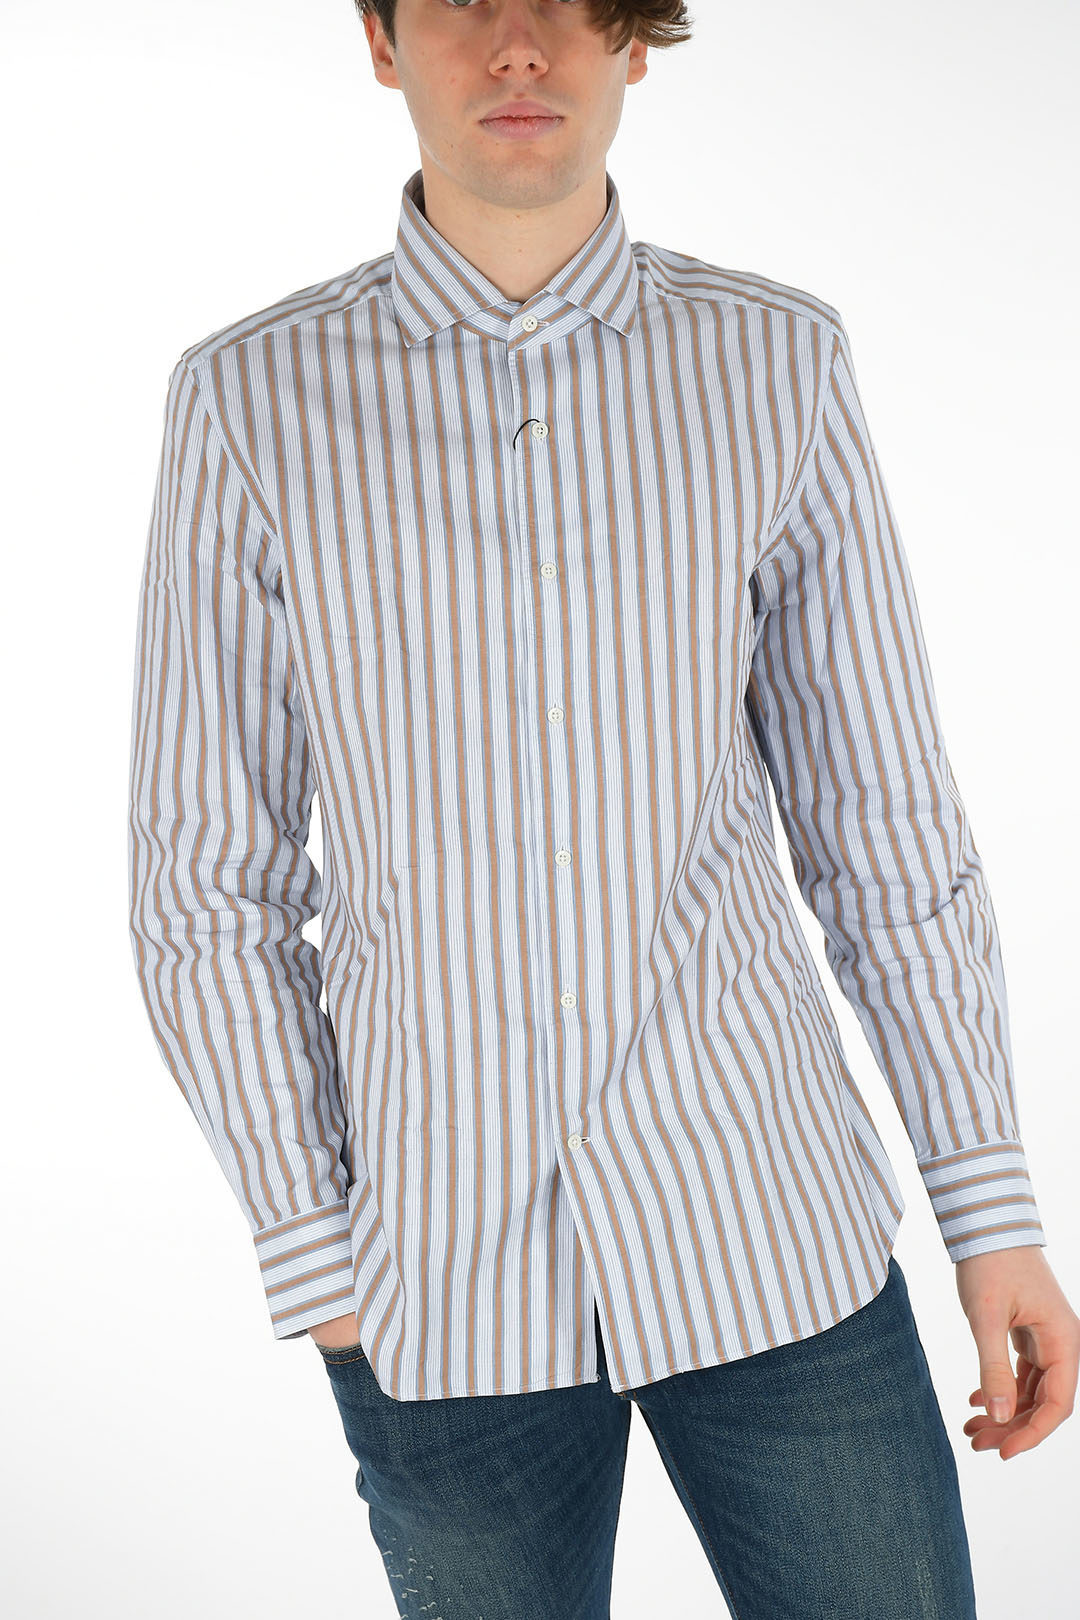 Corneliani Hairline Striped Shirt with Standard Collar men - Glamood Outlet